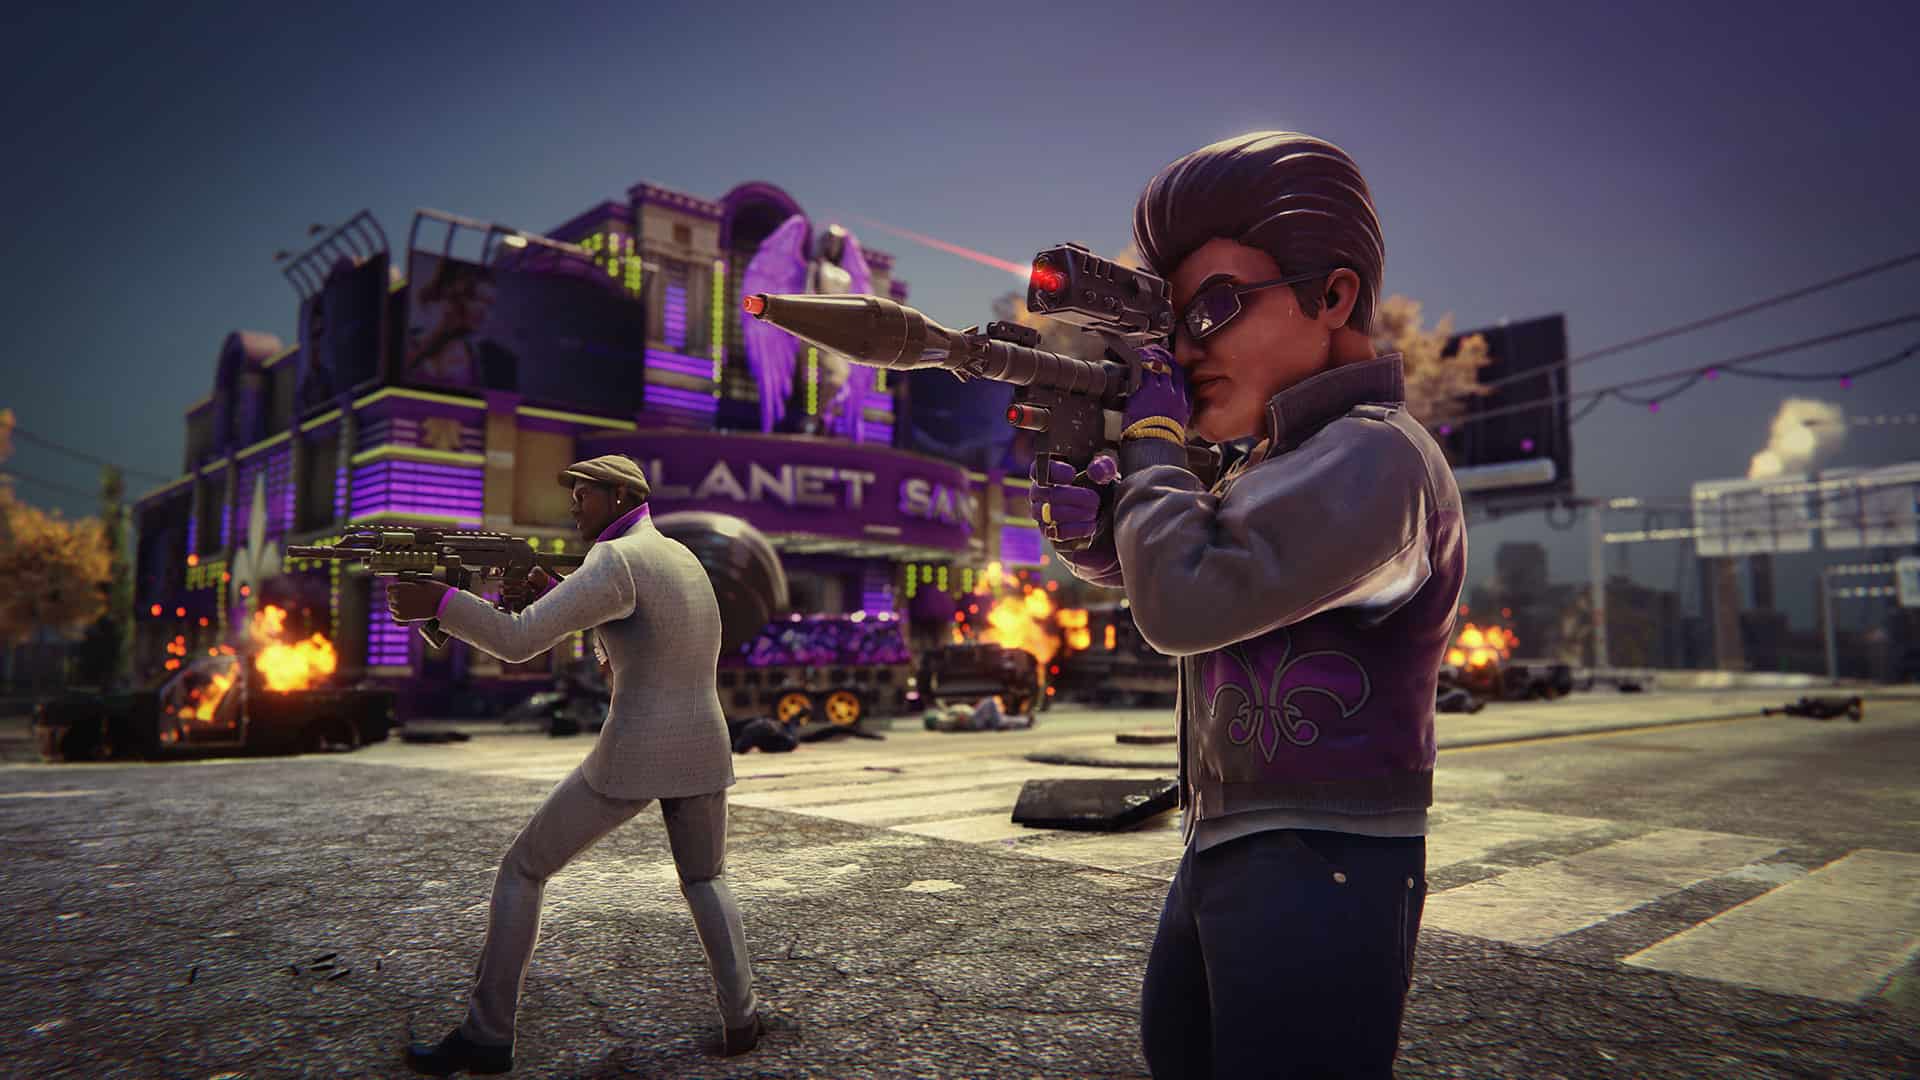 Weapons in Saints Row: The Third Remastered.